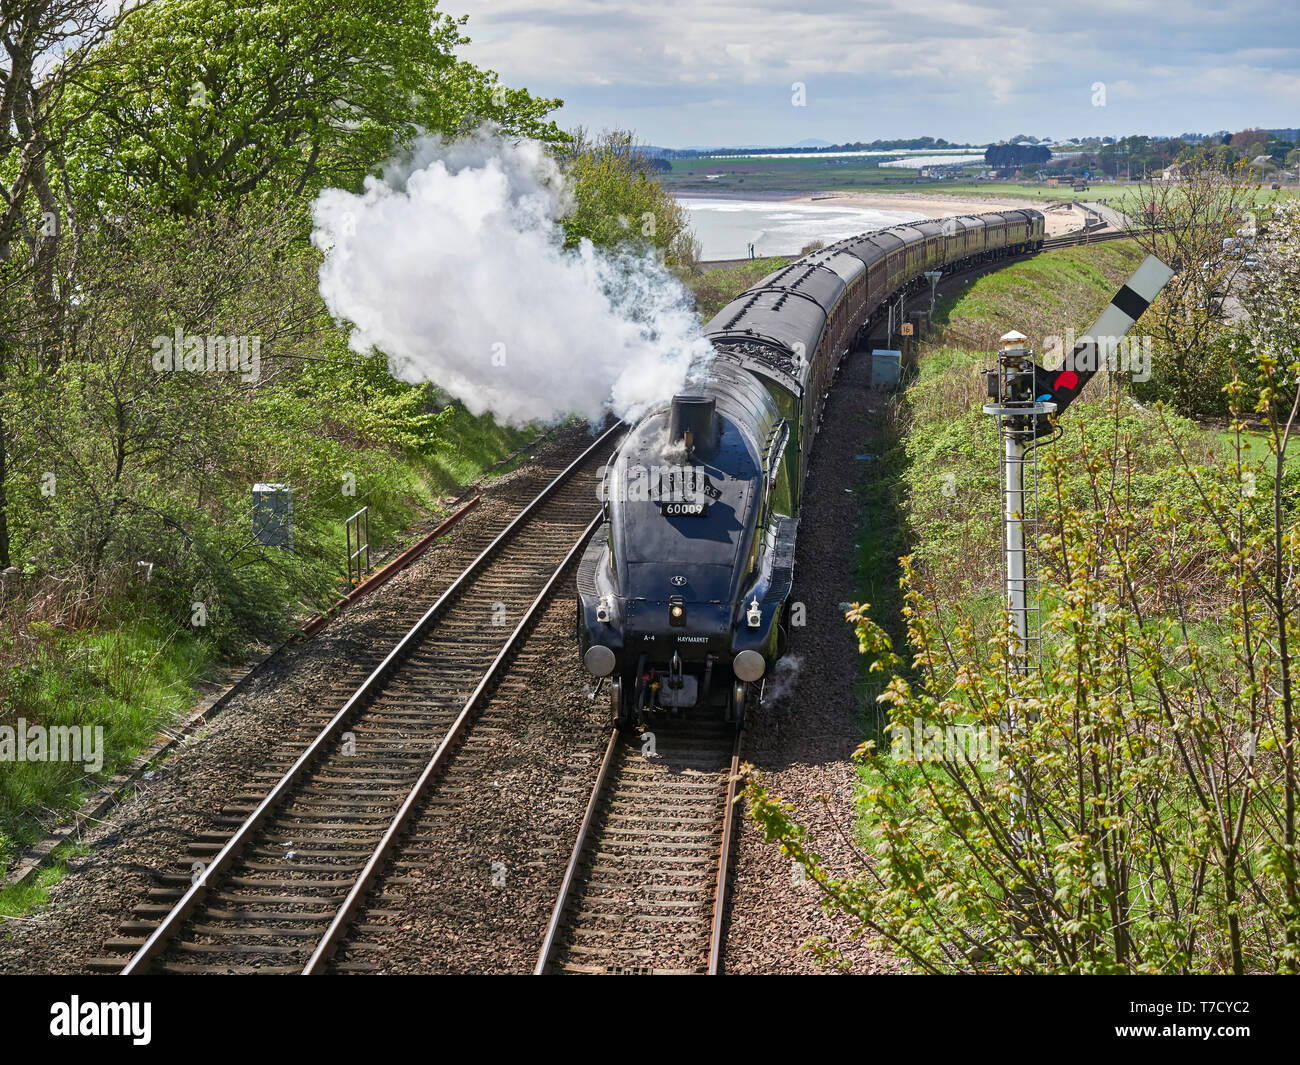 The Nigel Gresley designed A-4 Locomotive, the Union of South Africa passing through the Coastal town of Arbroath in Scotland. Stock Photo